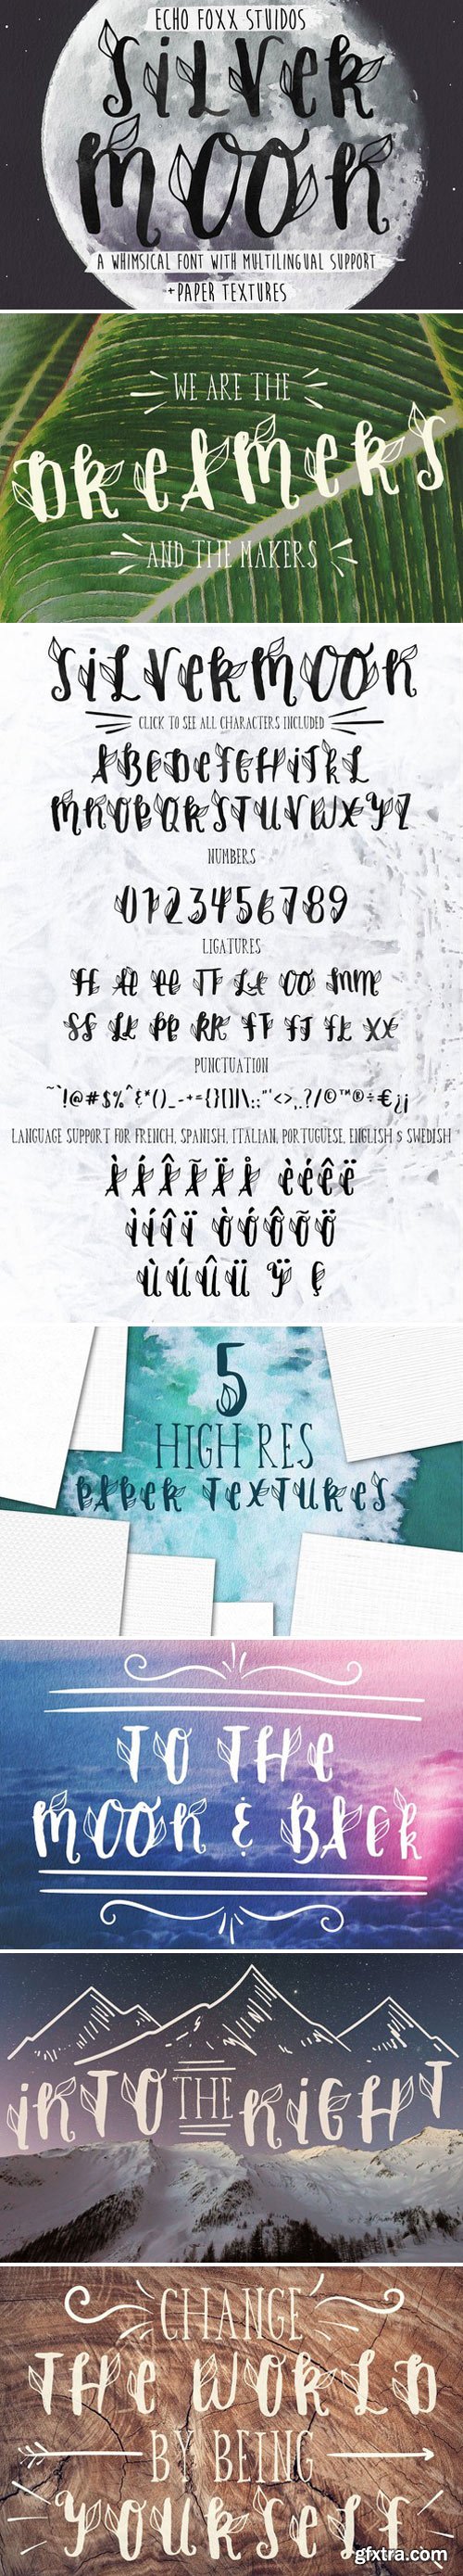 CM - Silver Moon Font + Extras 2355658